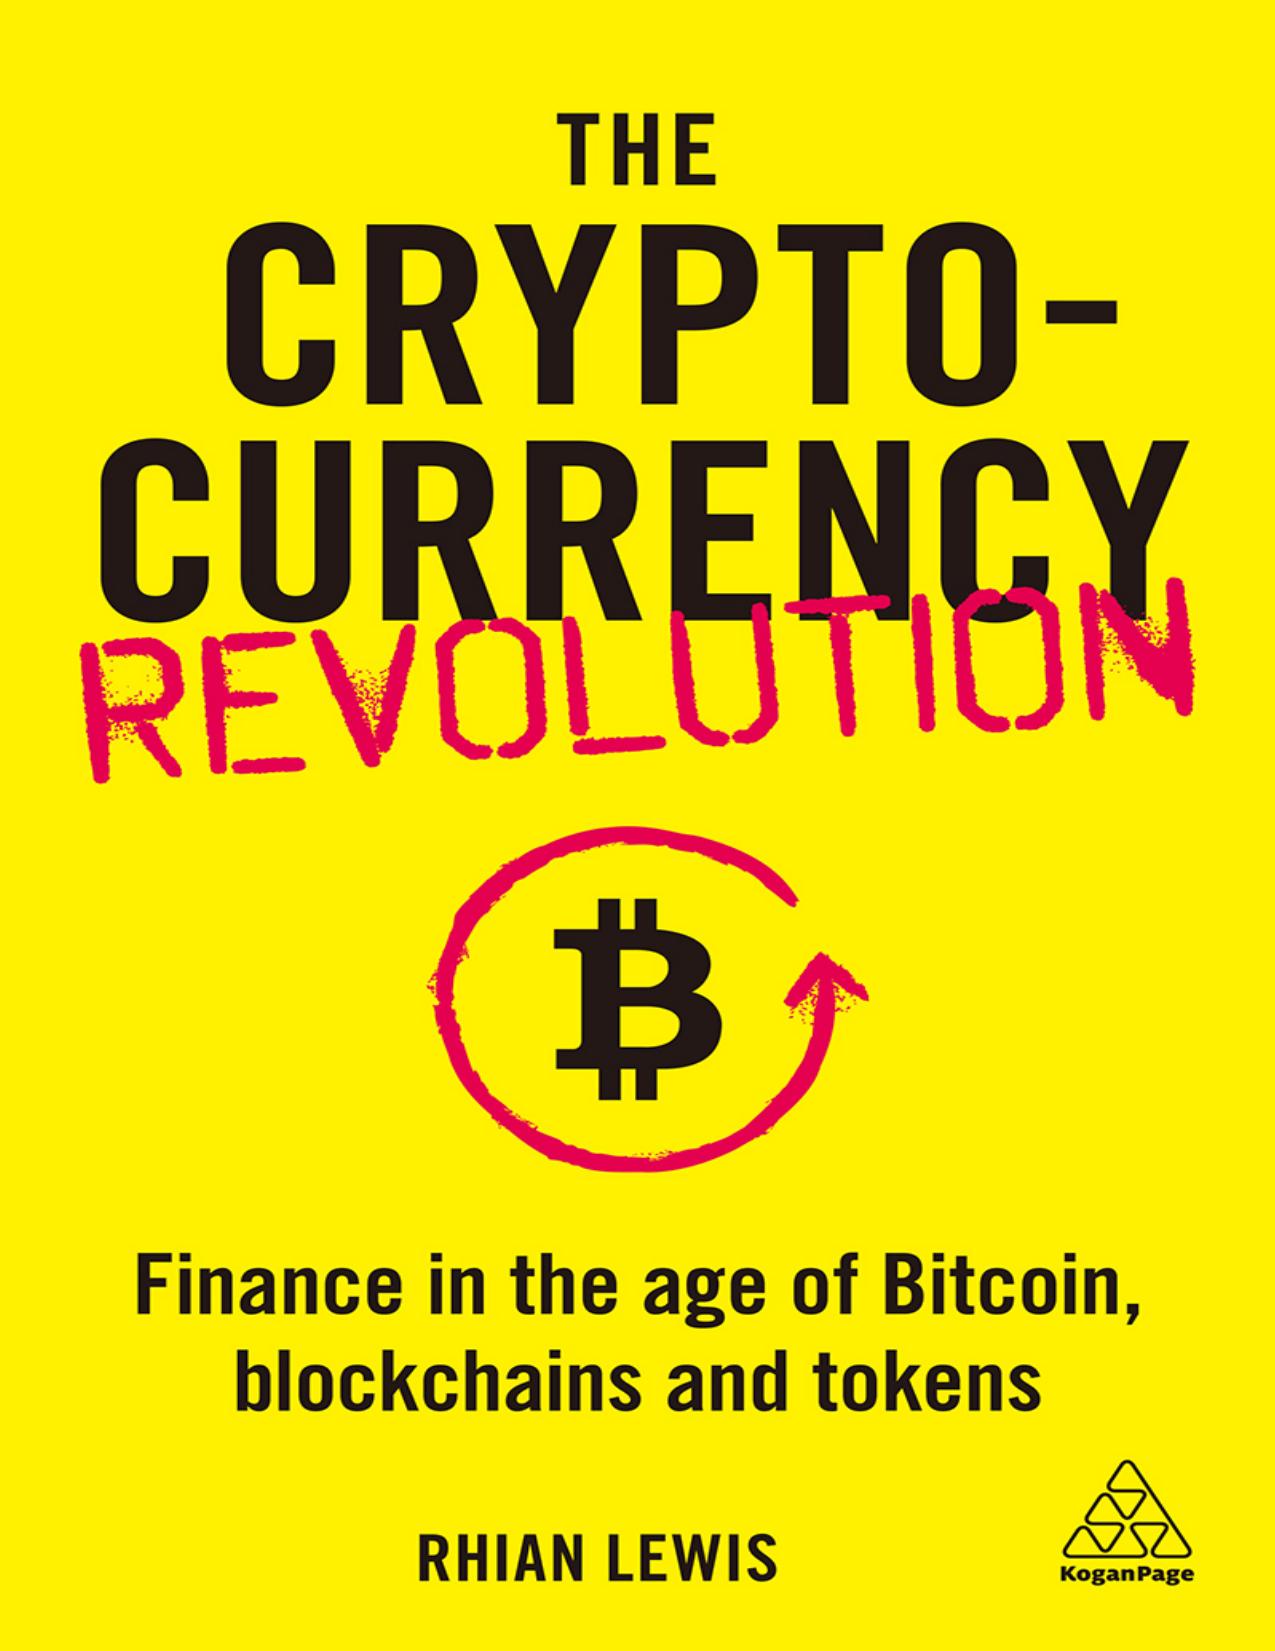 The Cryptocurrency Revolution by Rhian Lewis